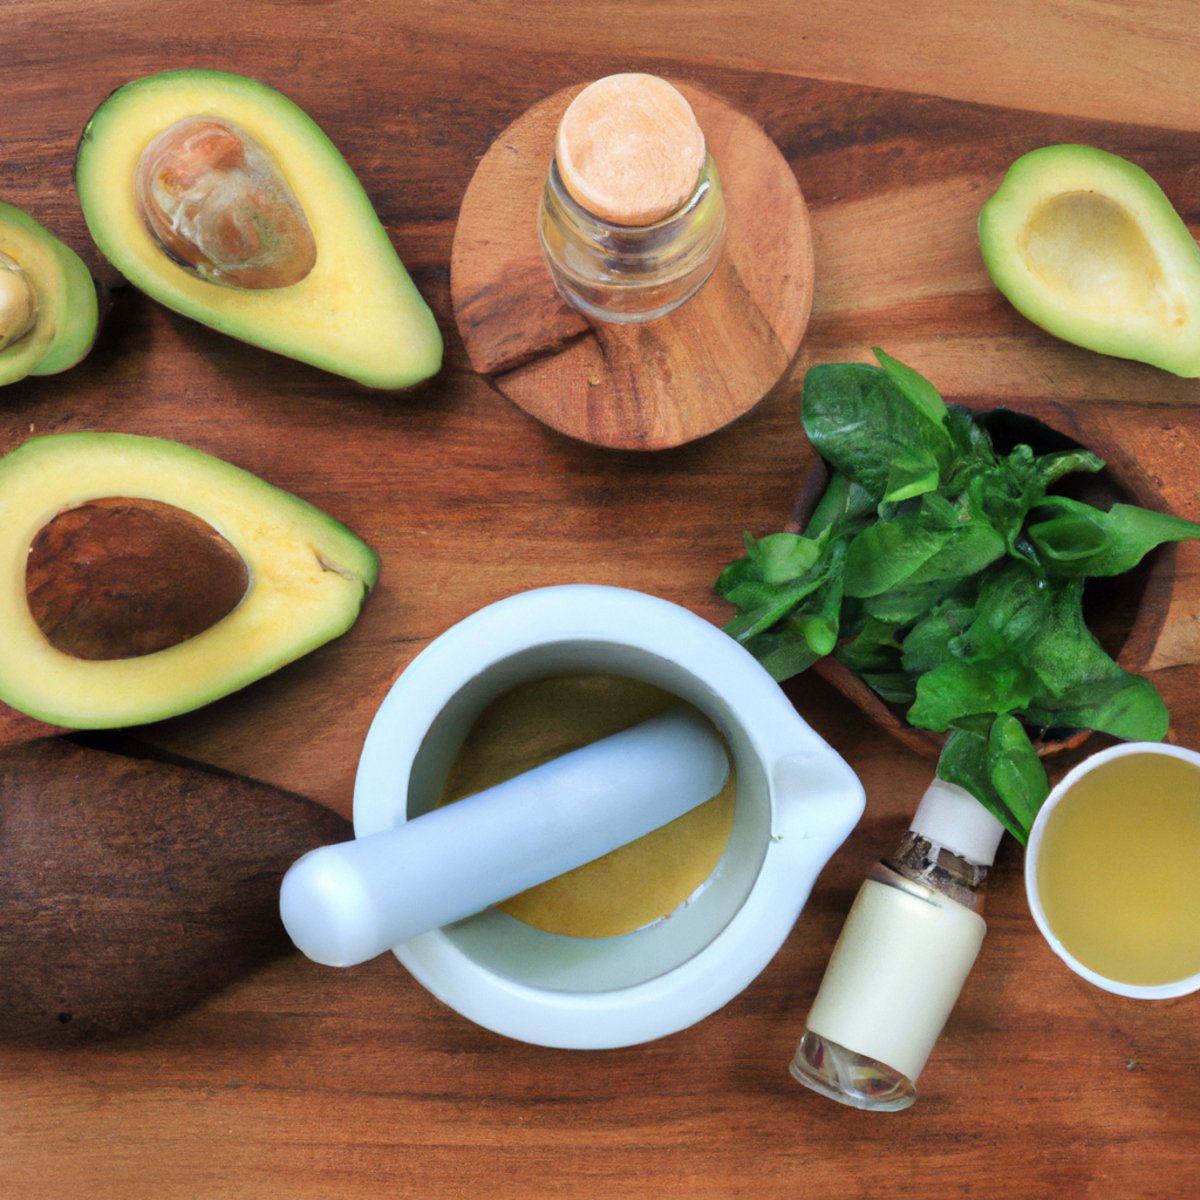 Haircare for curly hair - DIY hair mask ingredients and tools on wooden table. Avocado, honey, coconut oil, mint leaves, mortar, pestle, spoon, measuring cup.